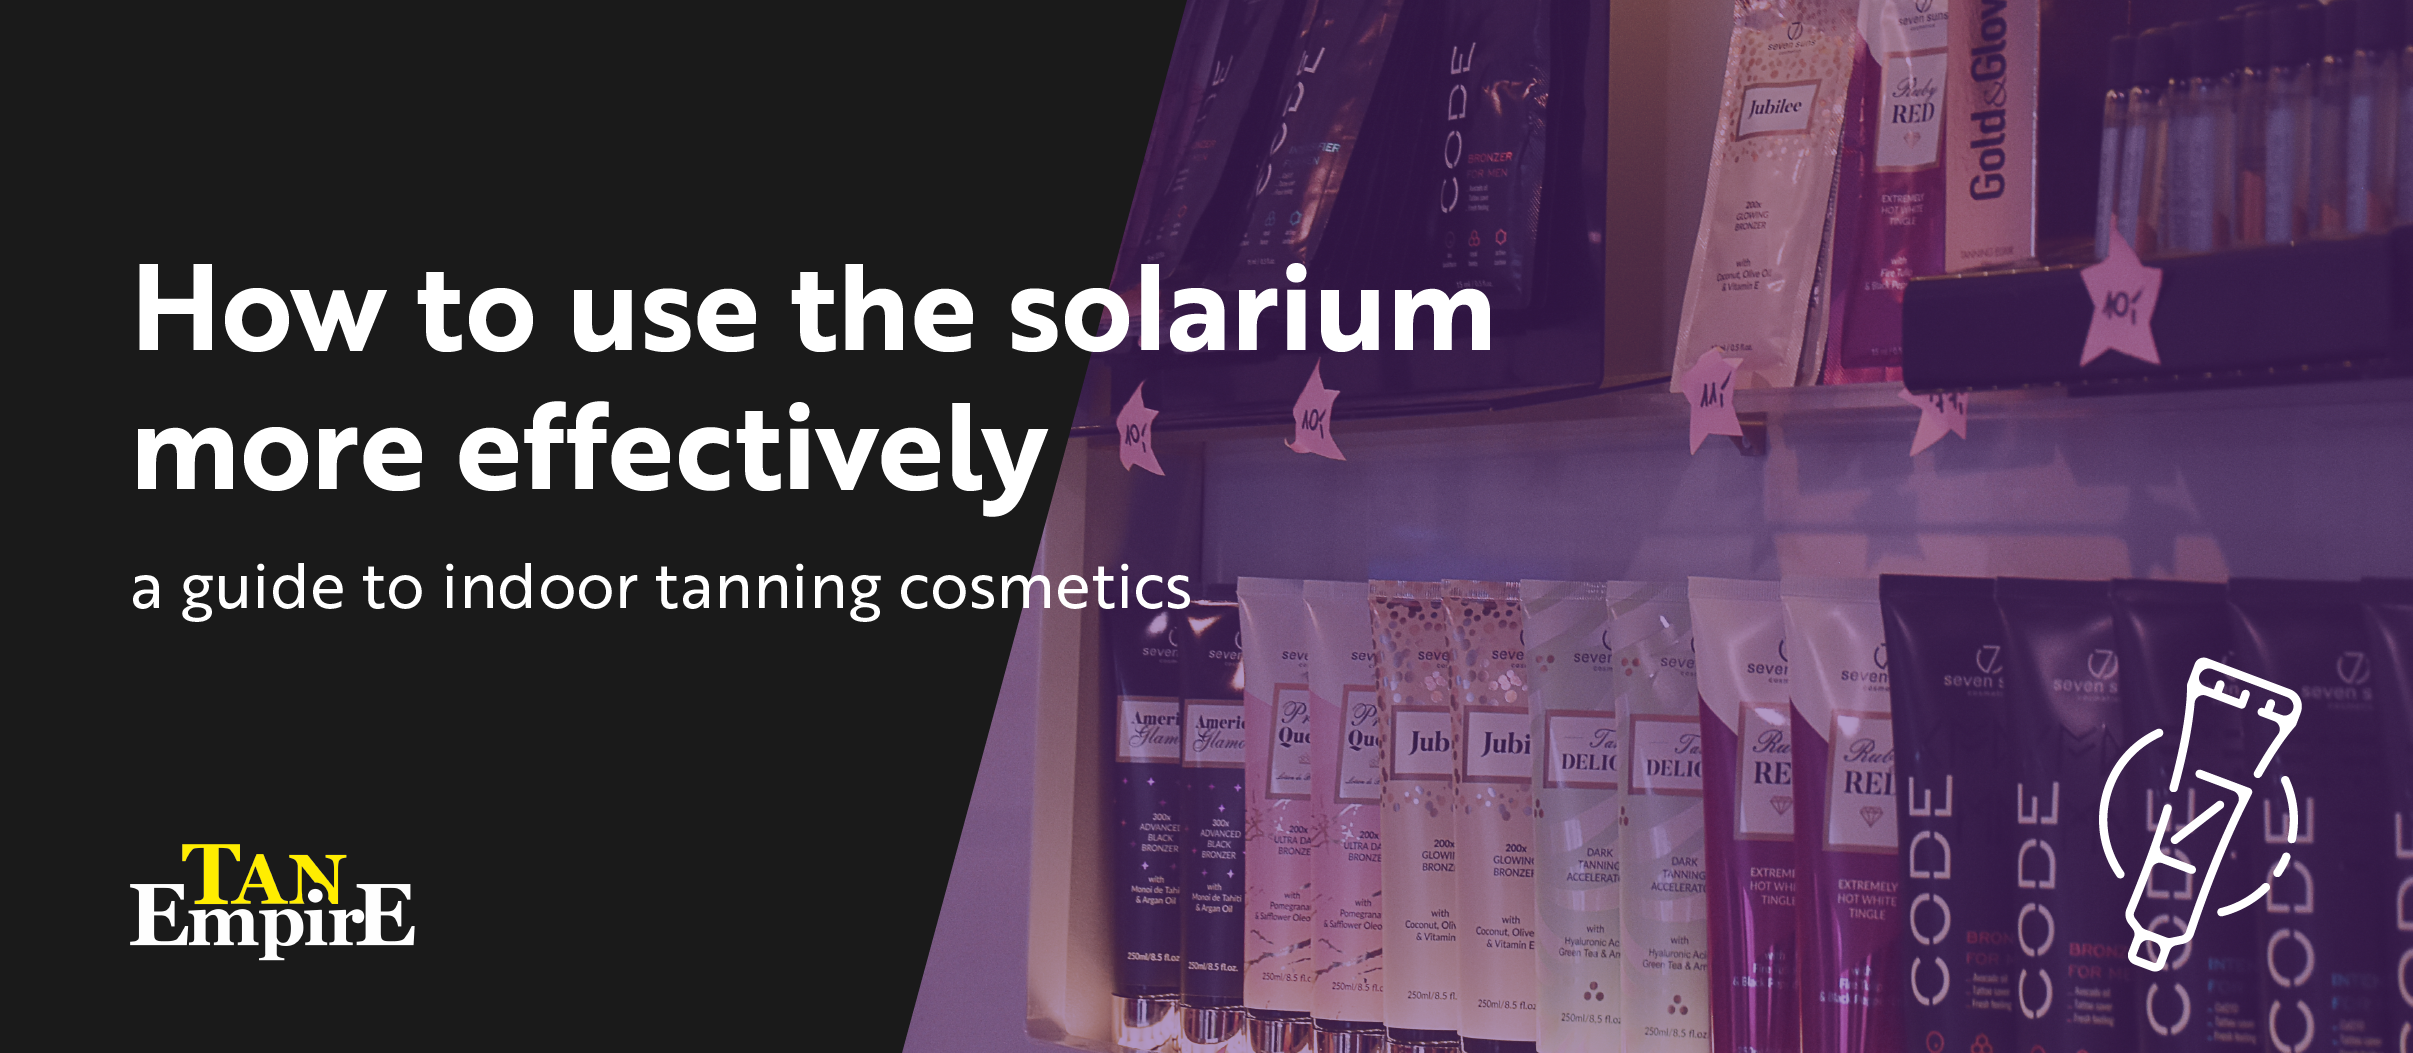 How to use the solarium more effectively